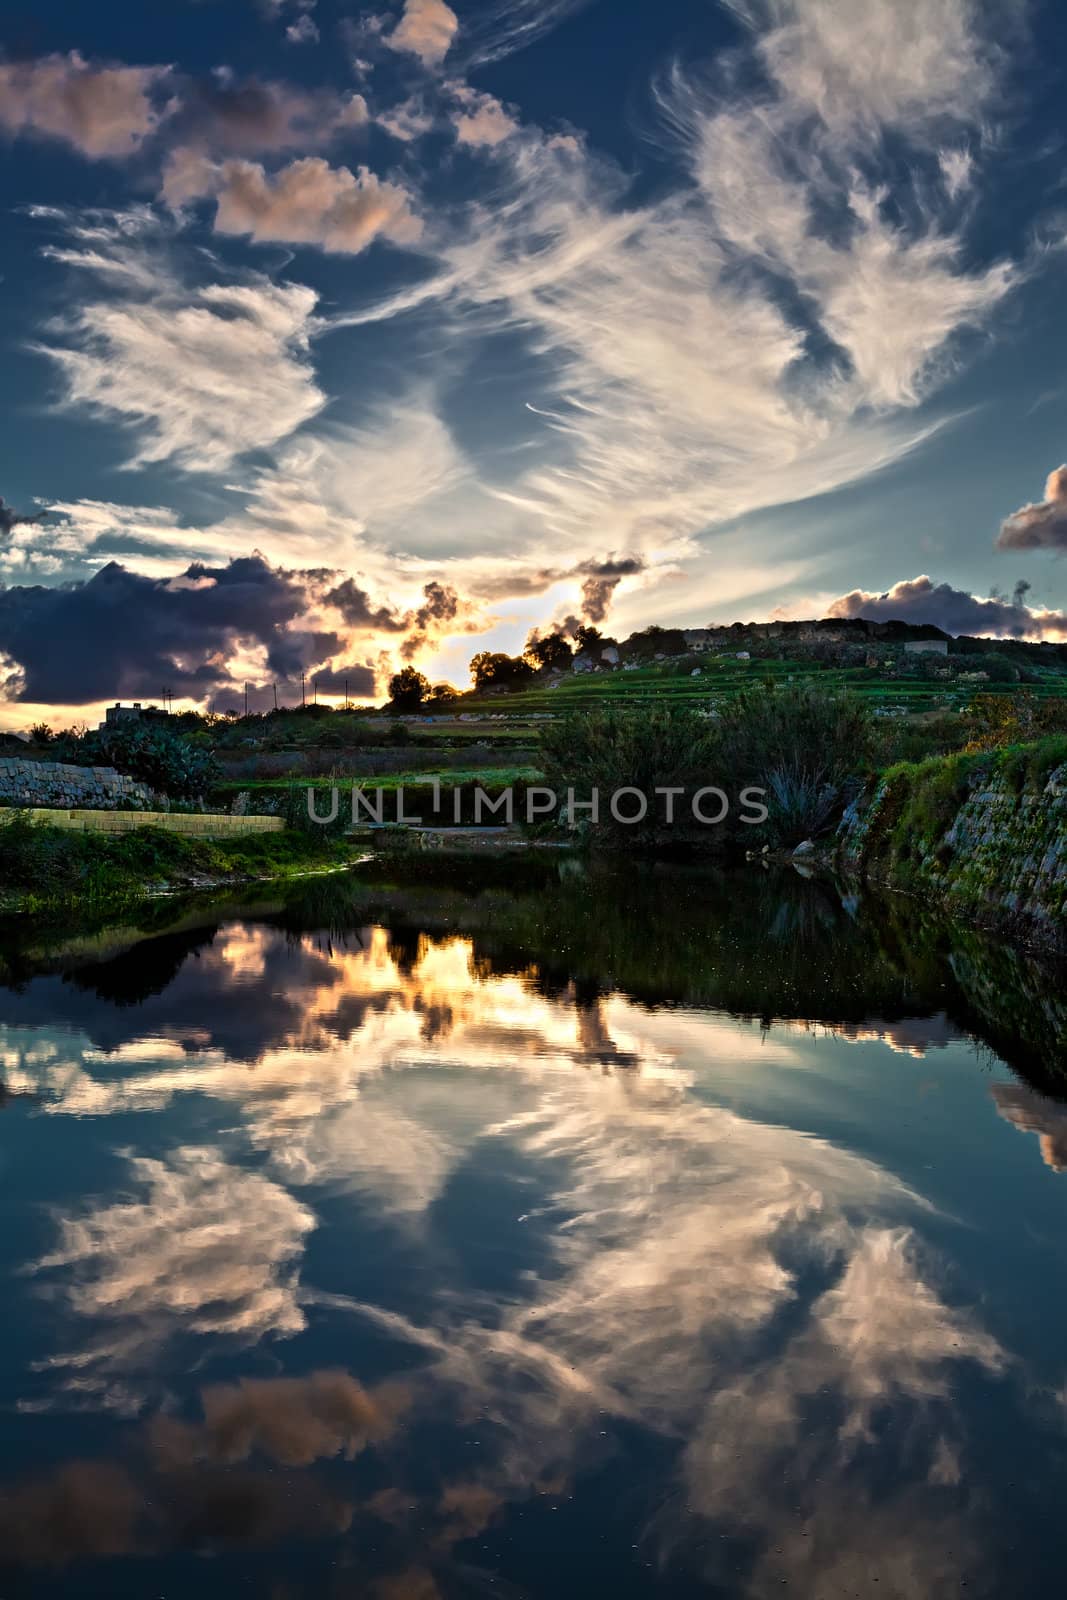 The beauty of the late evening sky as reflected in the calm waters at Chadwick Lakes in Malta